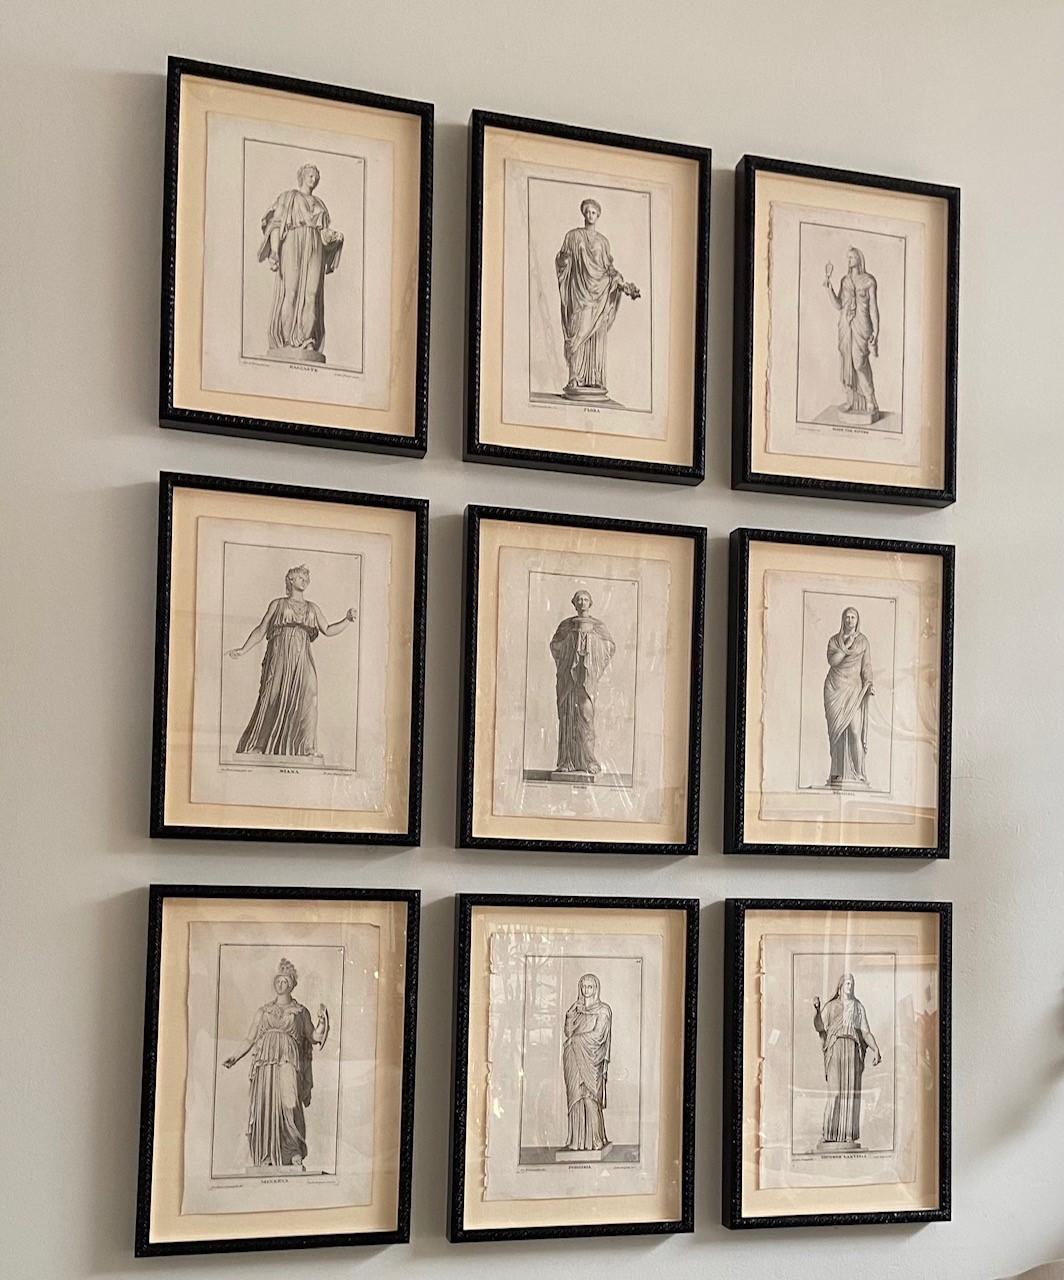 These Beautiful Italian 18th Century Black & White Engravings on Laid Paper Feature the Portrait of Female Statues, these pieces has been professionally Framed using all new Materials.
The Artist: Giovani Domenico Campiglia, Engraving by Carlo